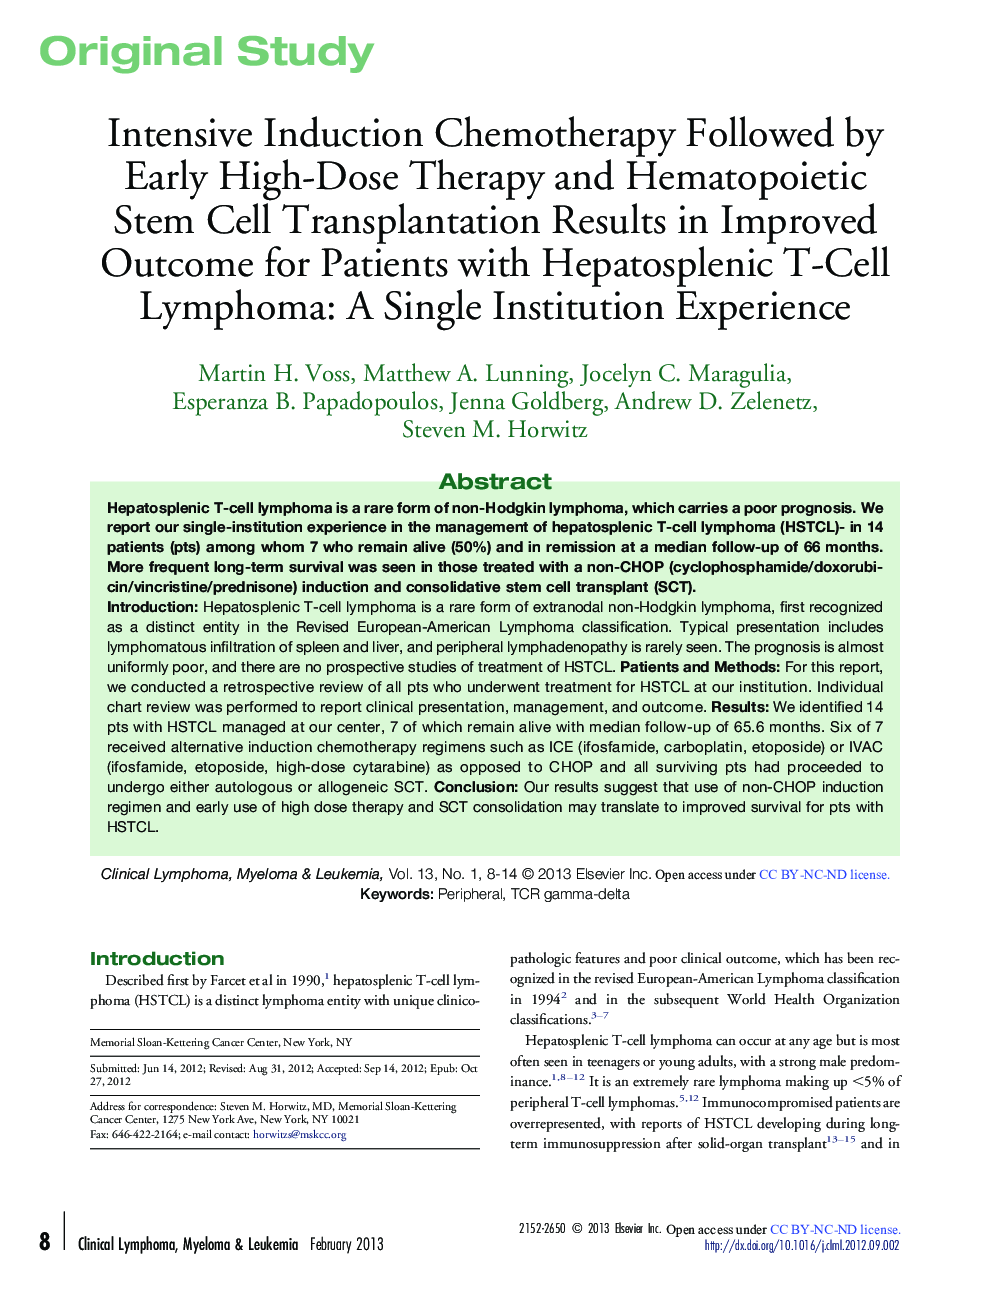 Original studyIntensive Induction Chemotherapy Followed by Early High-Dose Therapy and Hematopoietic Stem Cell Transplantation Results in Improved Outcome for Patients with Hepatosplenic T-Cell Lymphoma: A Single Institution Experience